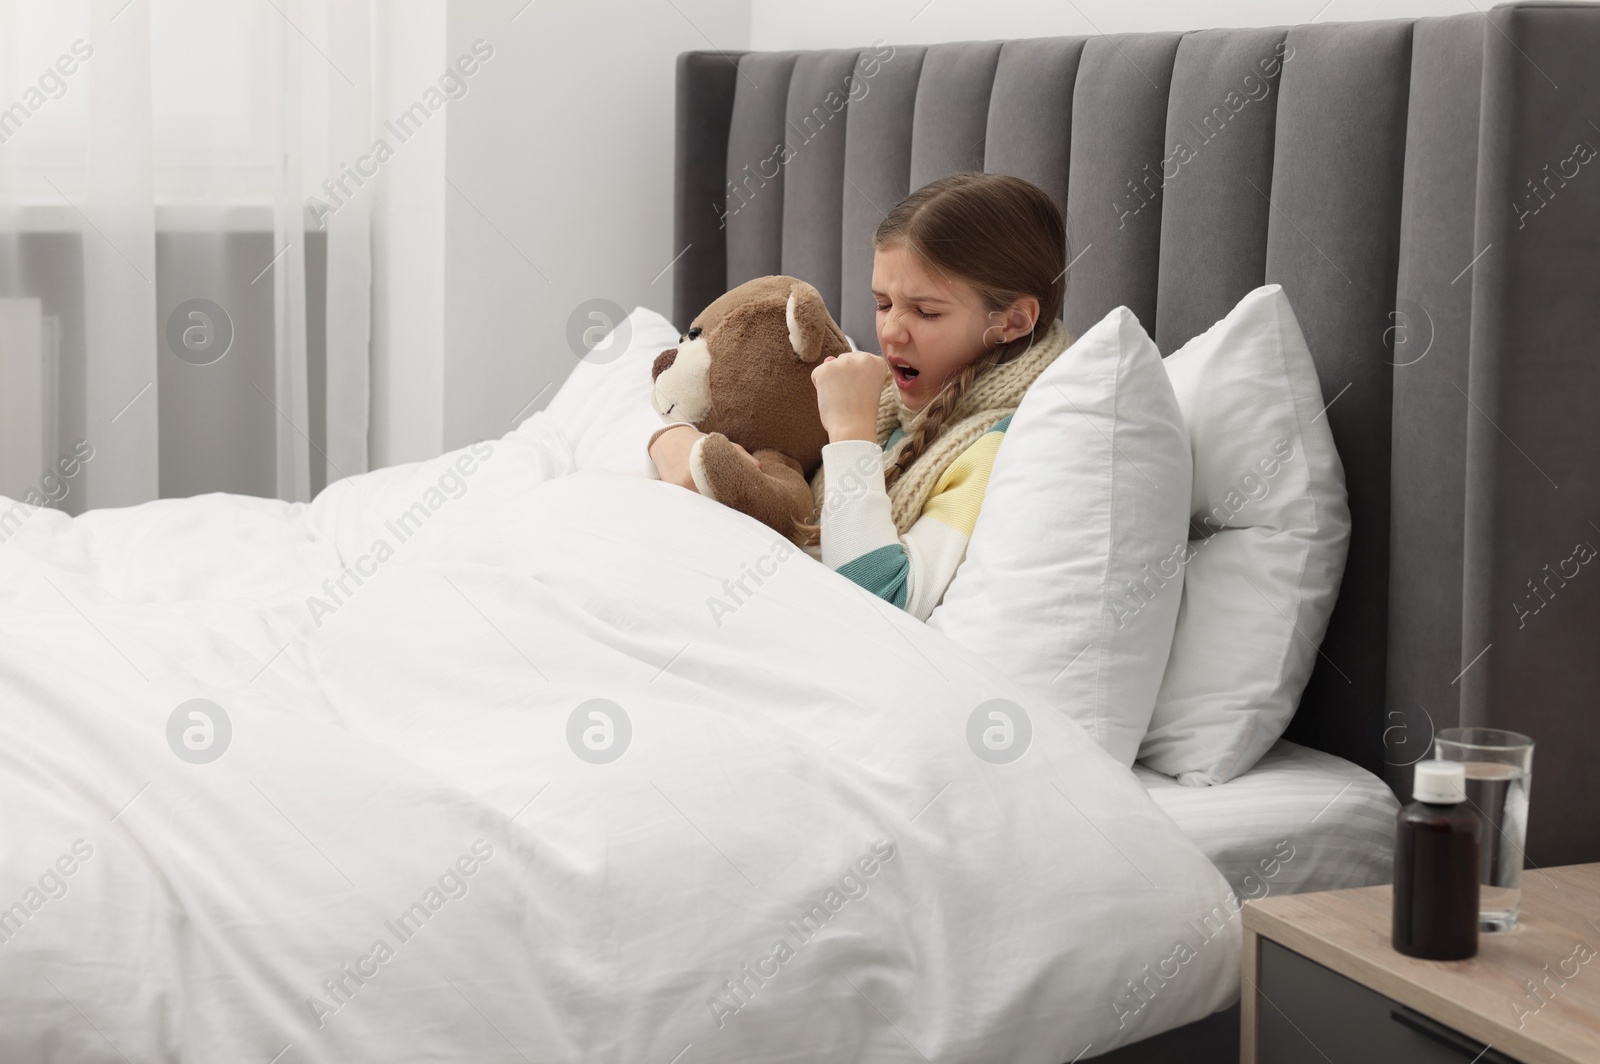 Photo of Sick girl with teddy bear coughing on bed at home